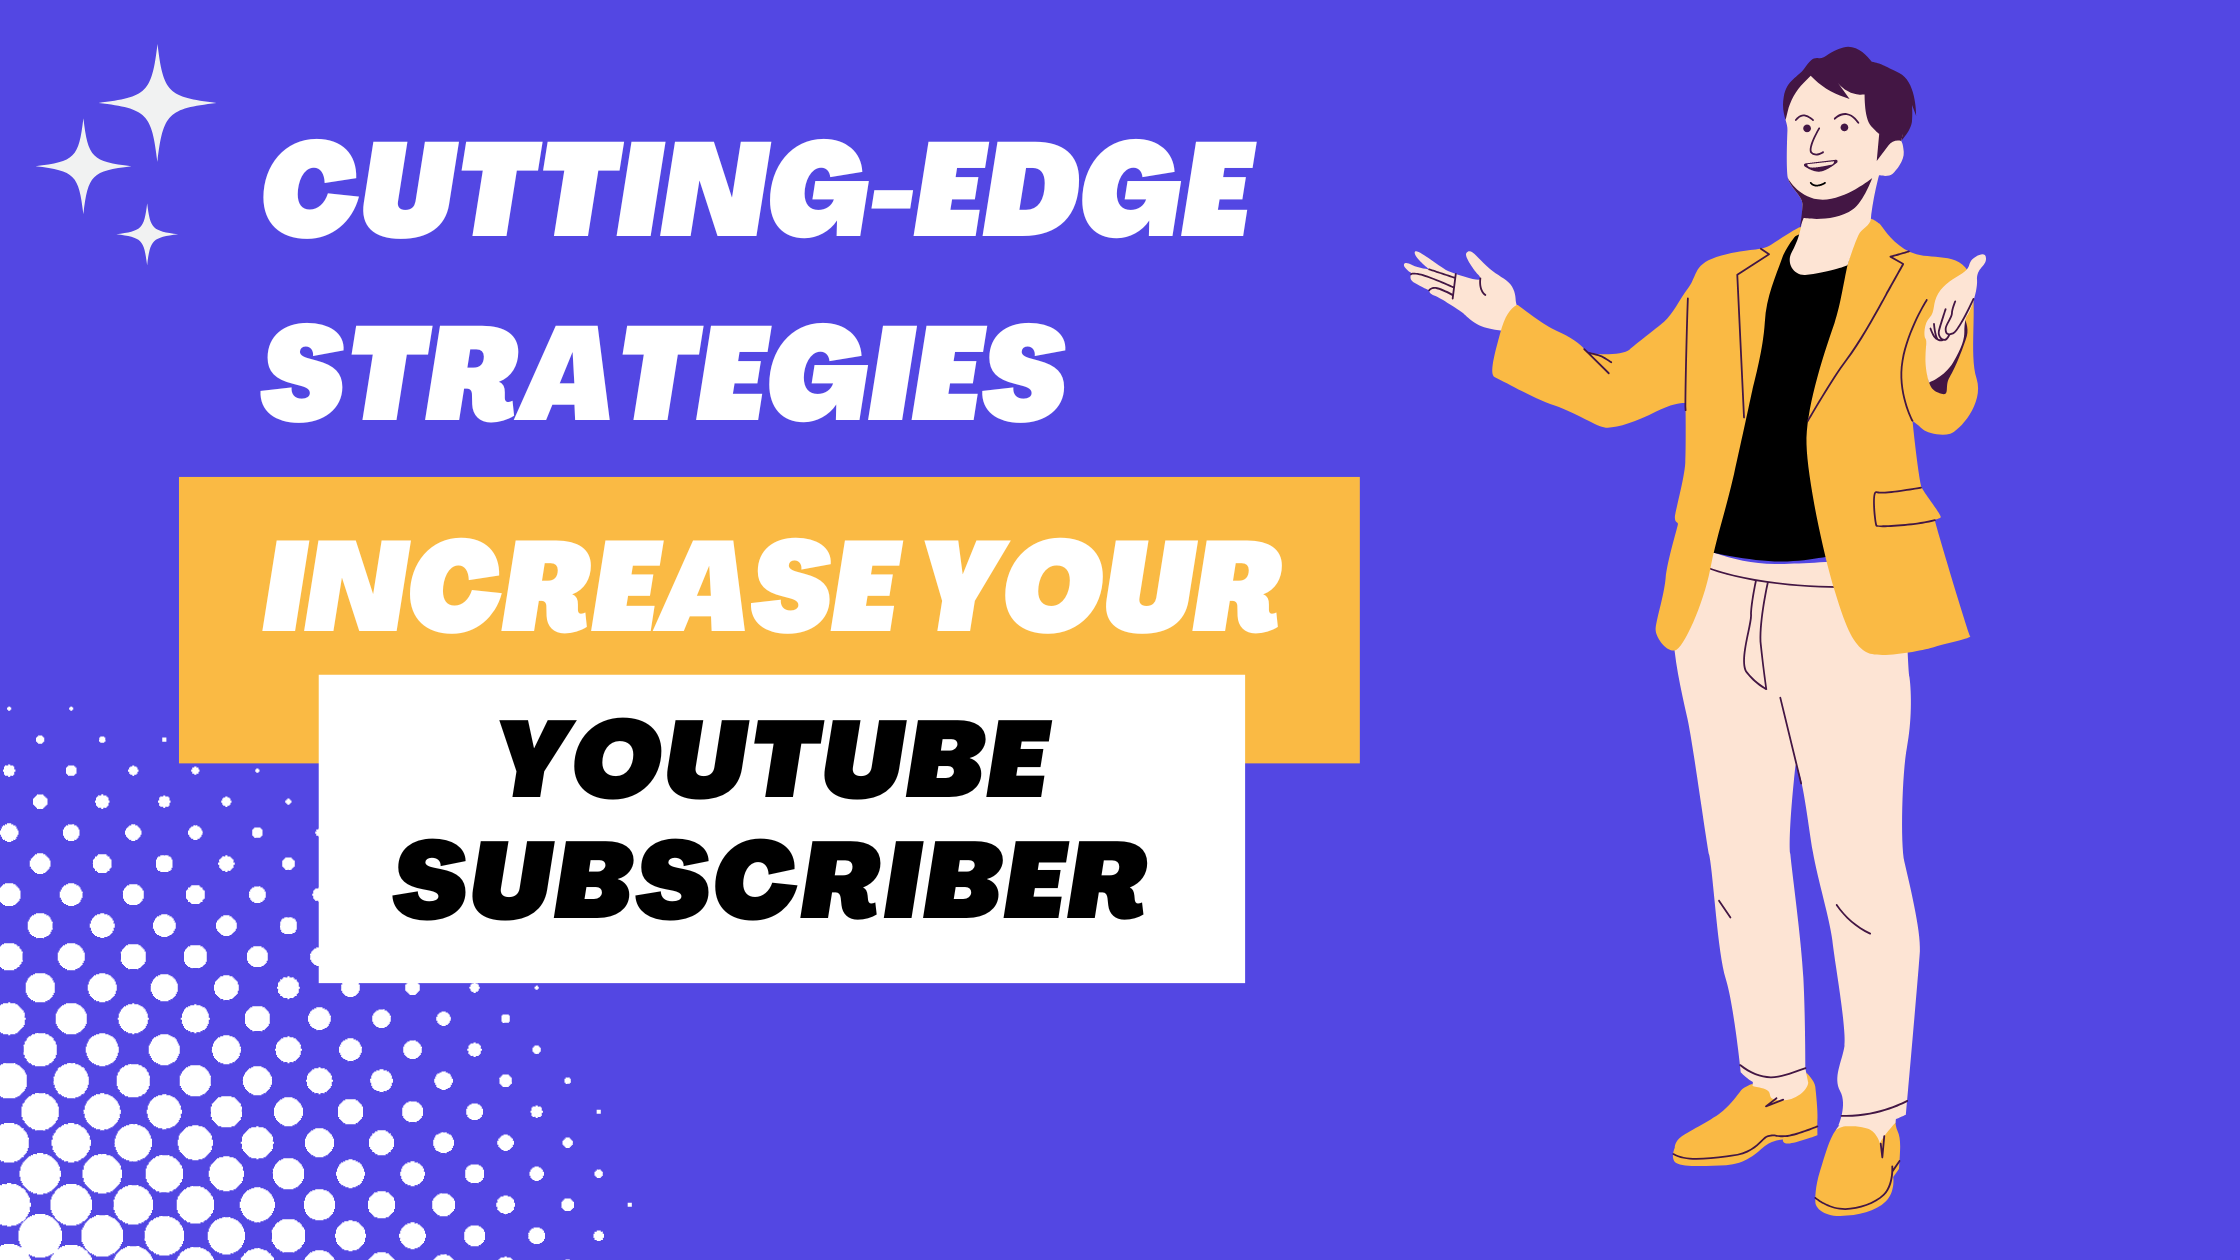 A person telling the latest strategies to increase your youtube subscribers